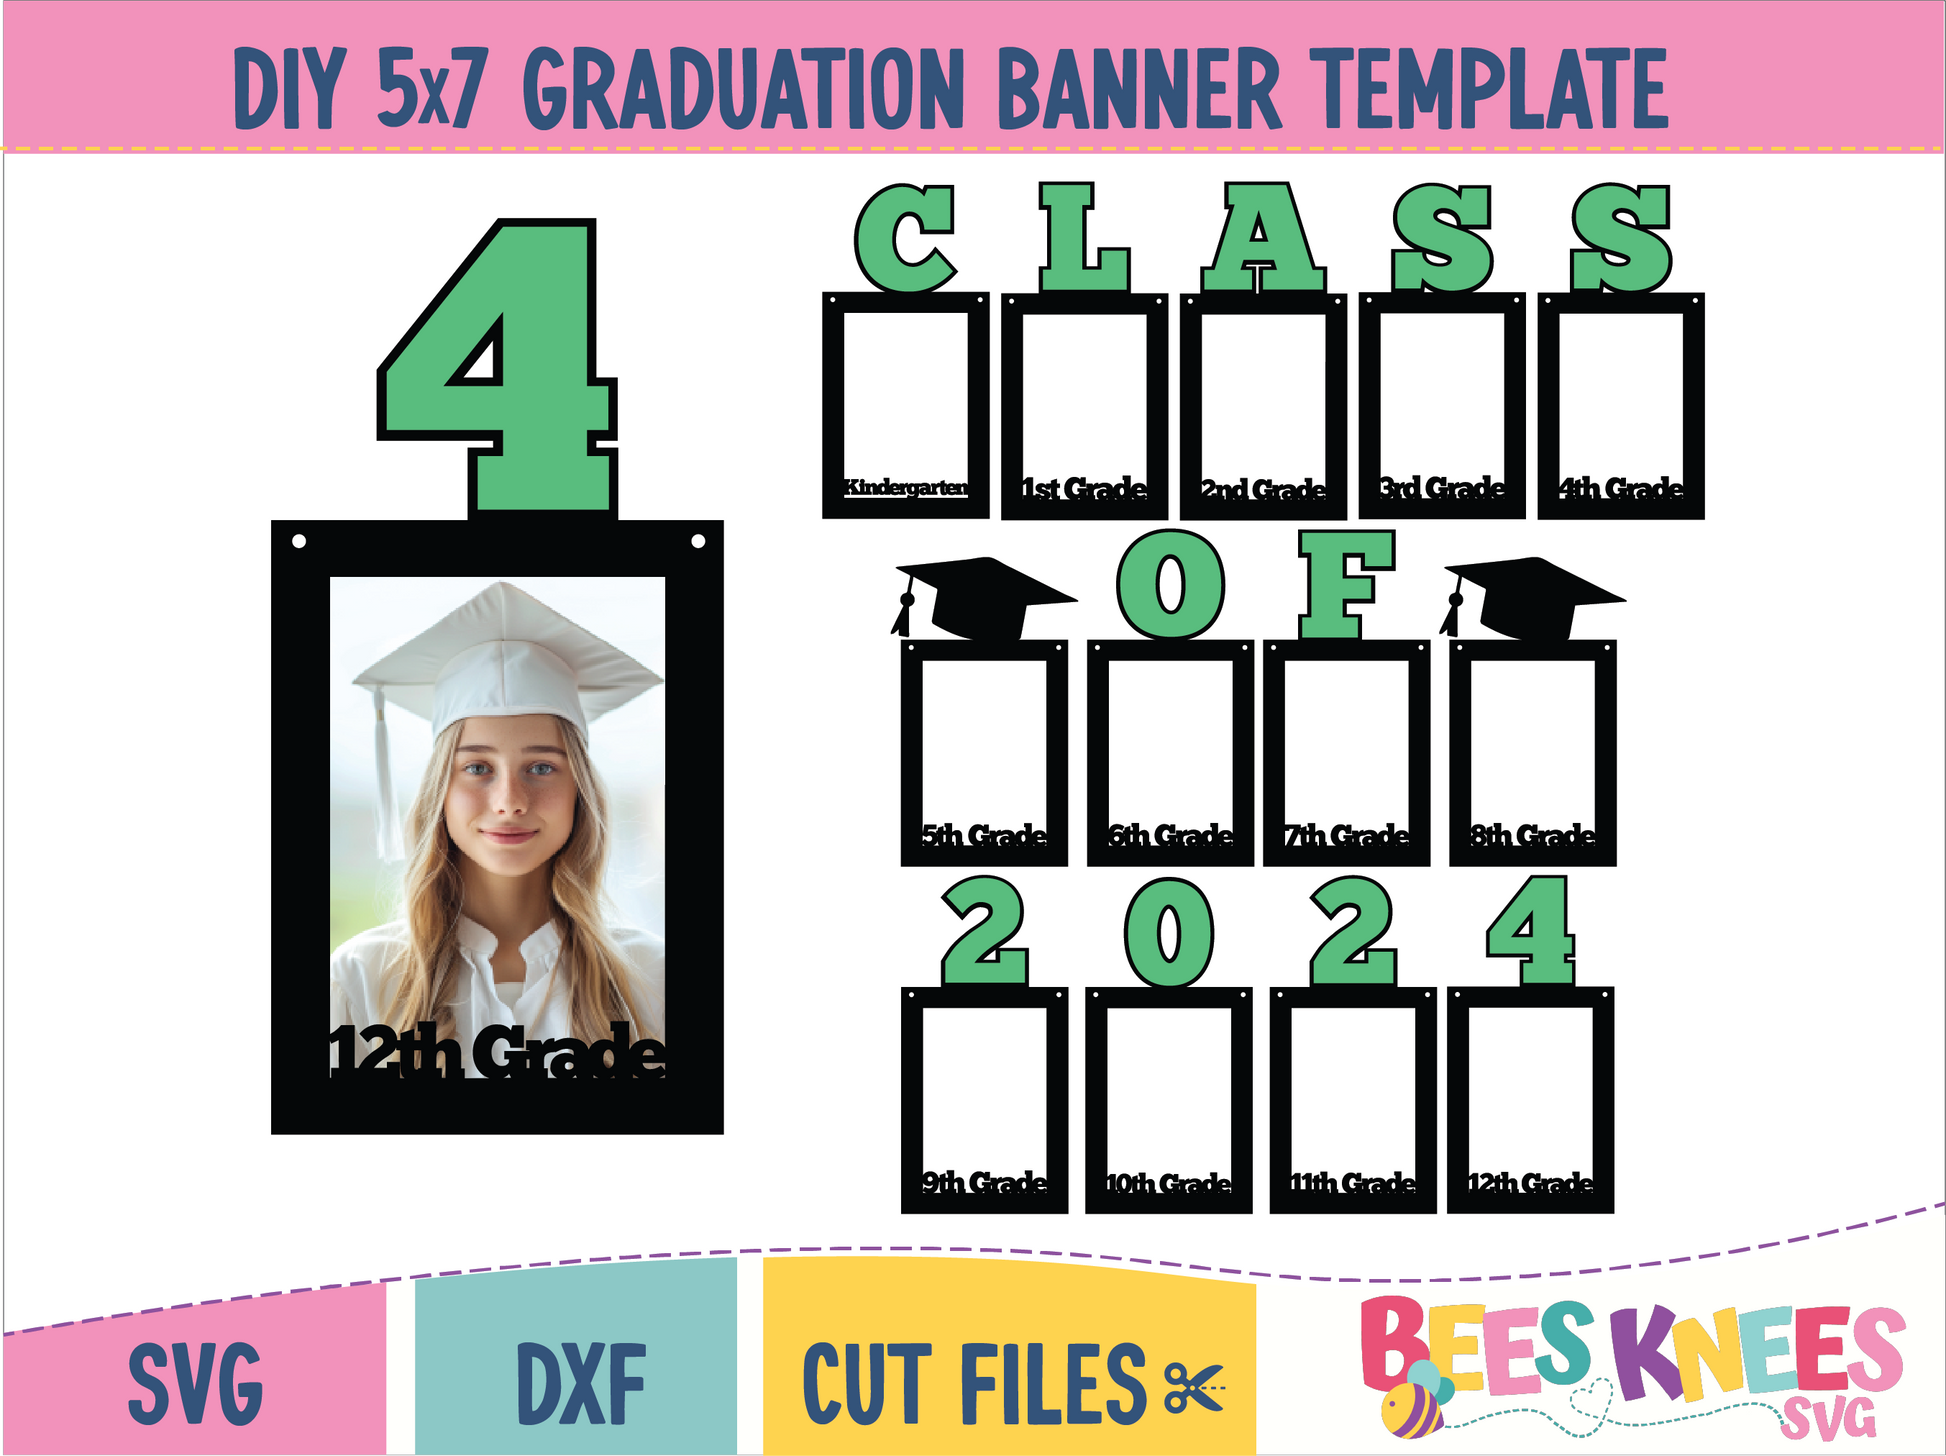 Graduation photo banner size 5x7 with frames including classes k - 12. Says Class of 2024 across the top.